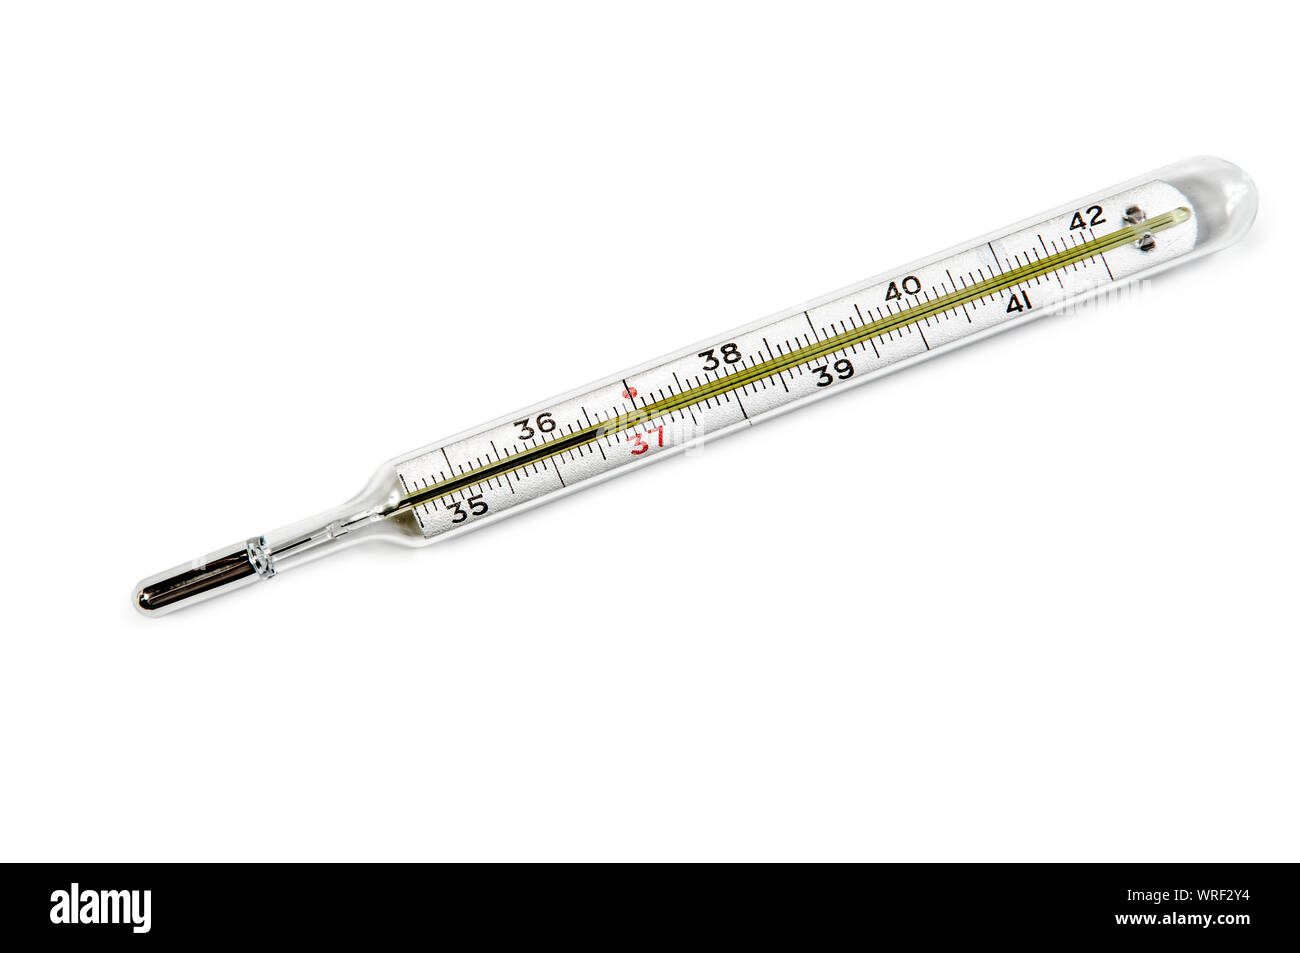 https://c8.alamy.com/comp/WRF2Y4/medical-mercury-thermometer-isolated-on-white-background-with-clipping-path-normal-health-temperature-366-WRF2Y4.jpg